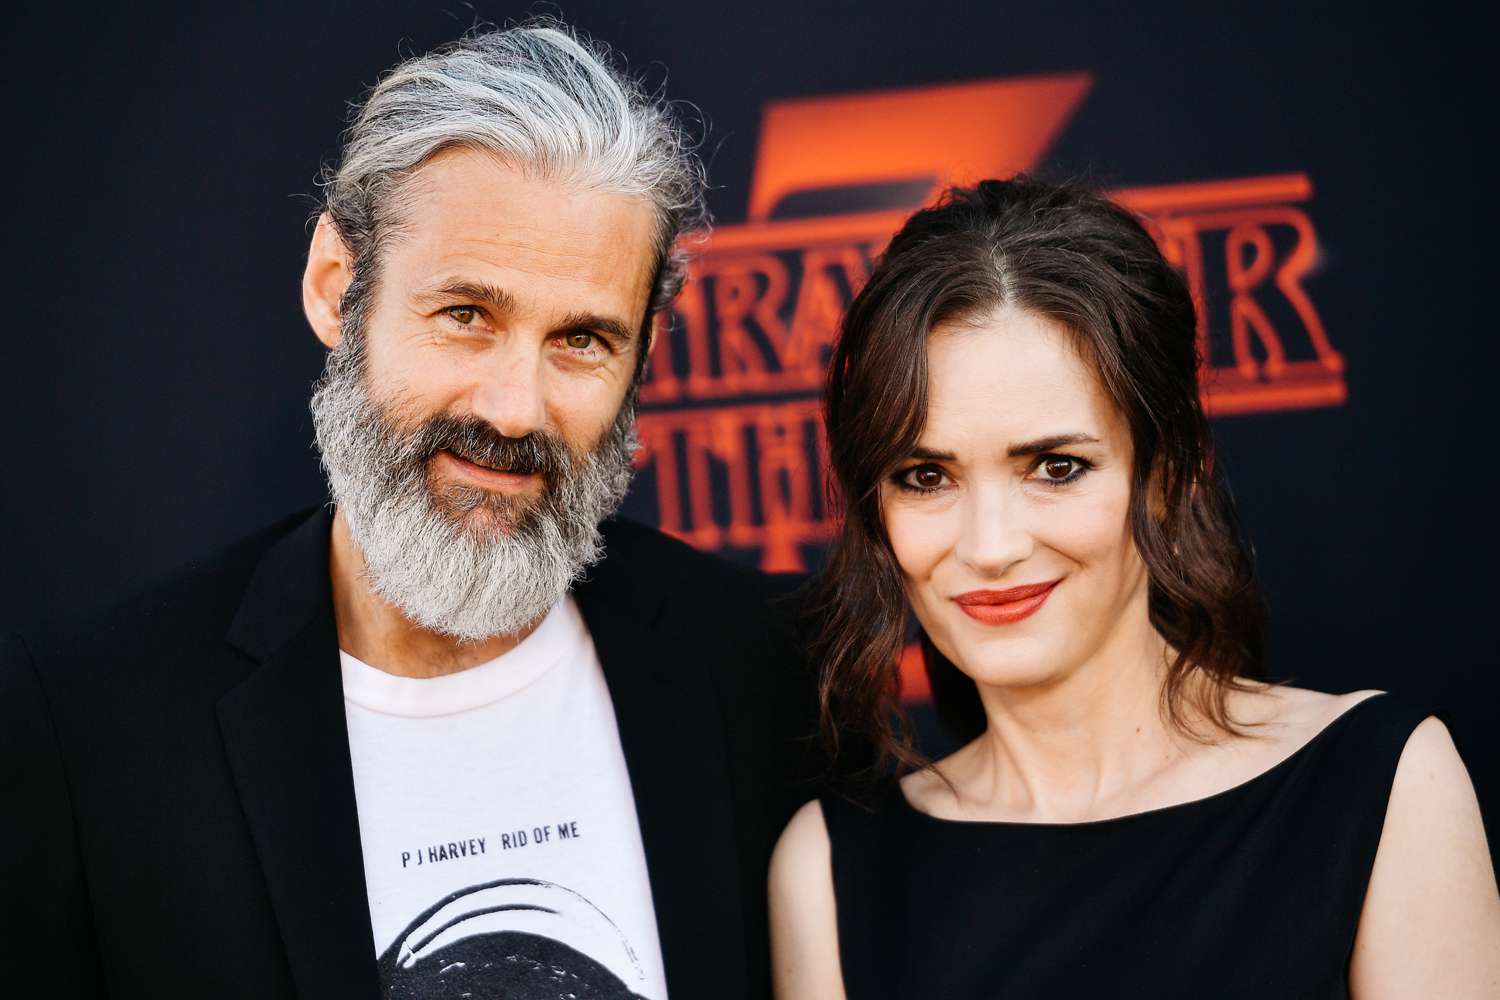 Winona Ryder Feels 'Really Lucky' for 14 Years with Partner Scott Mackinlay Hahn: 'He's So Great'